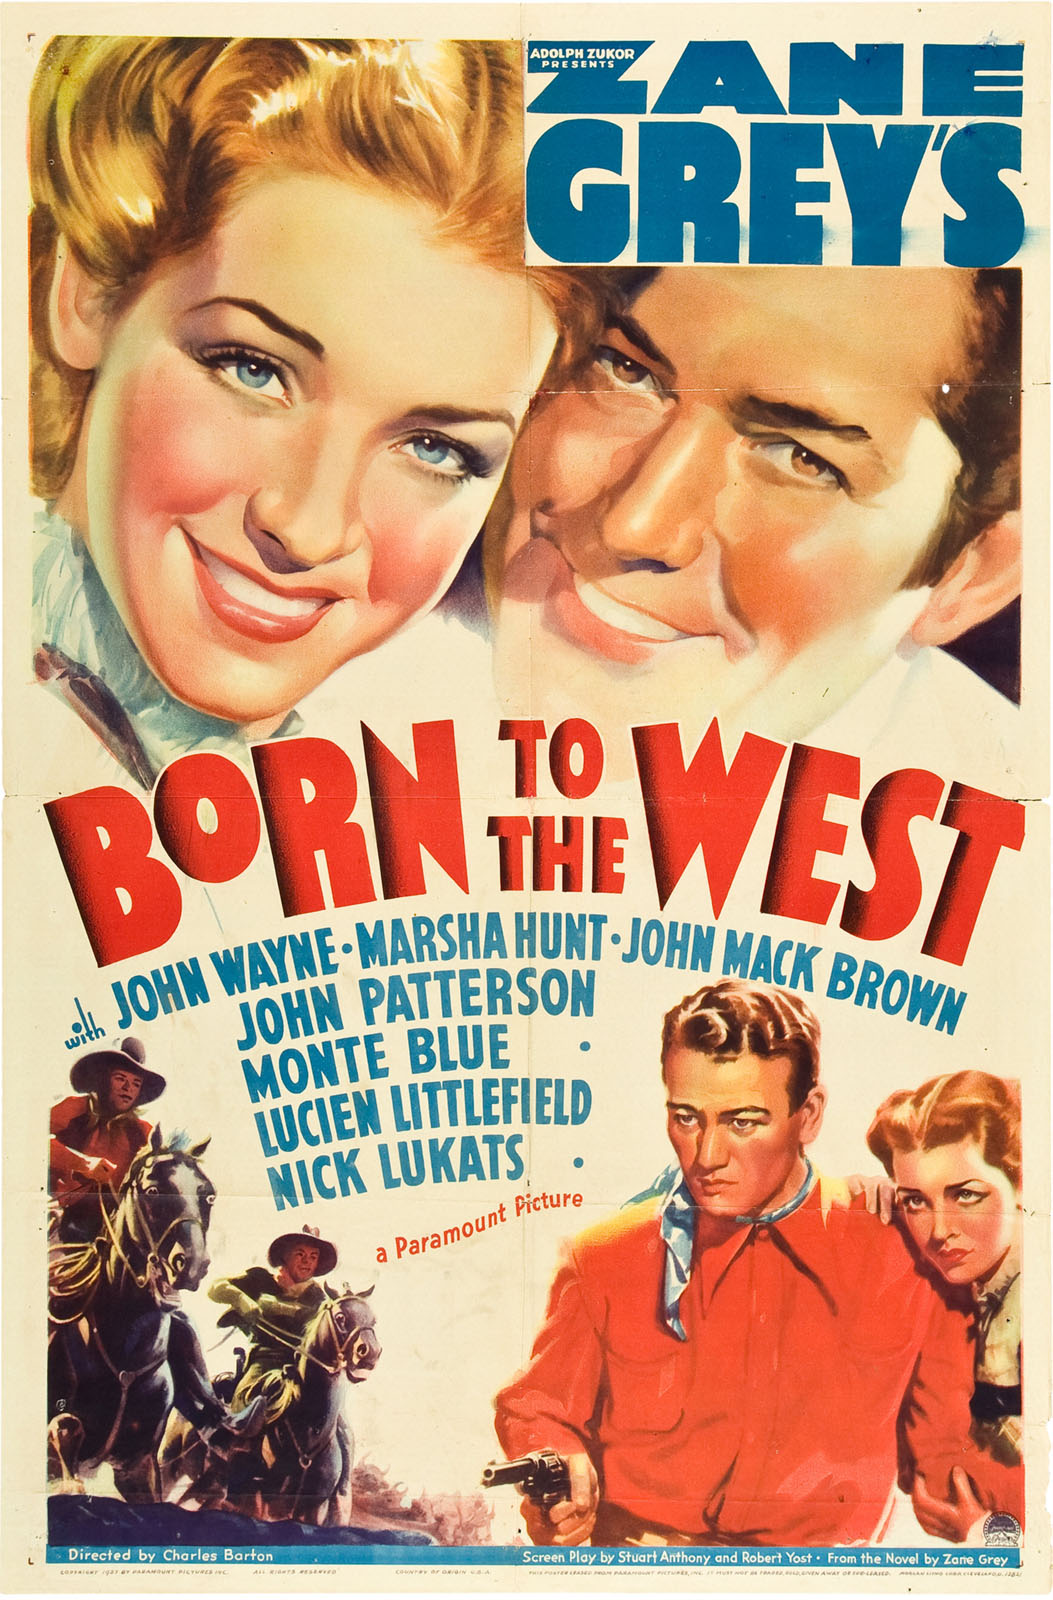 BORN TO THE WEST